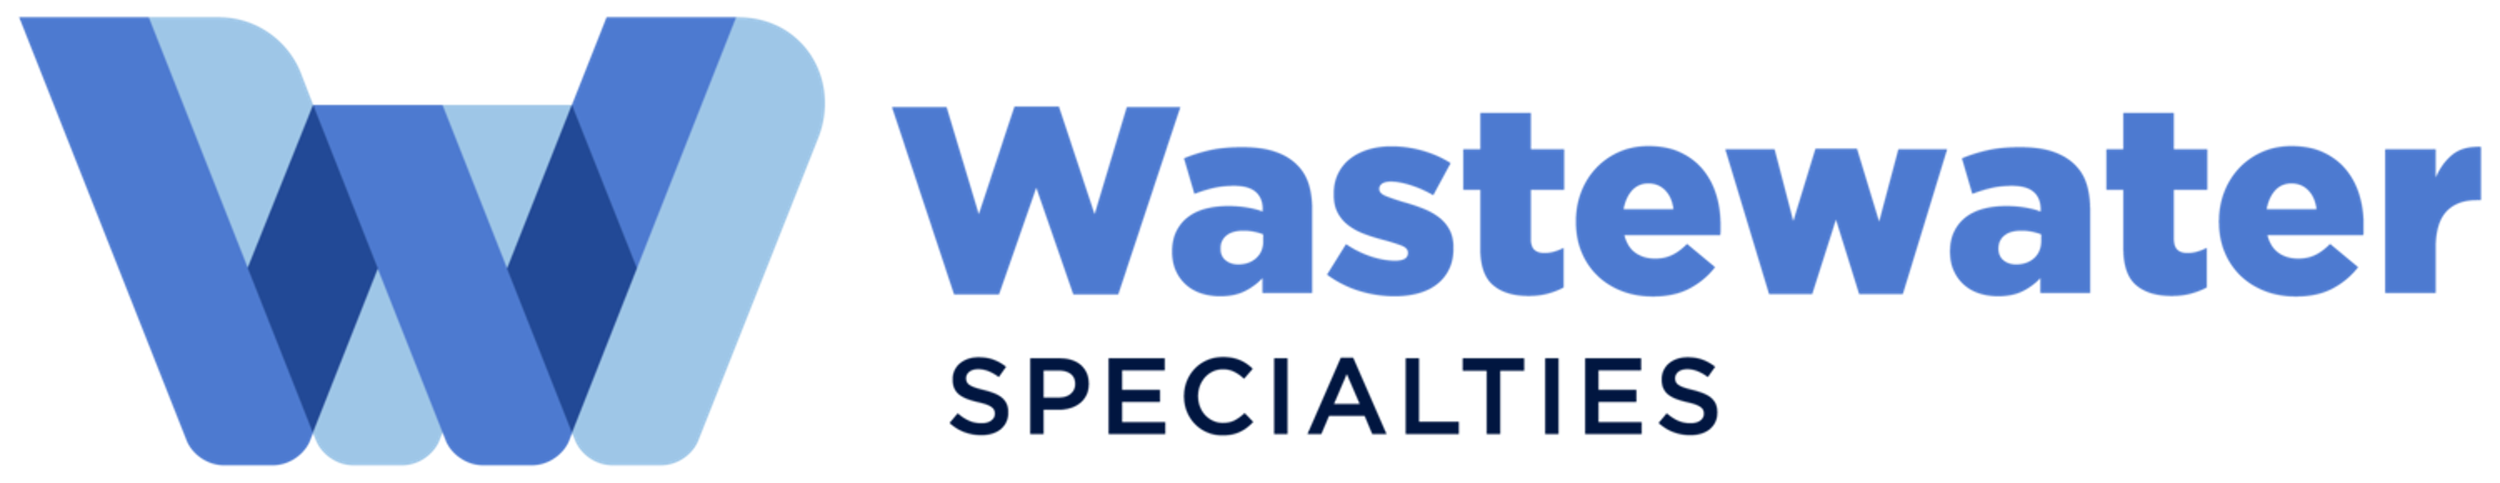 Wastewater Specialties